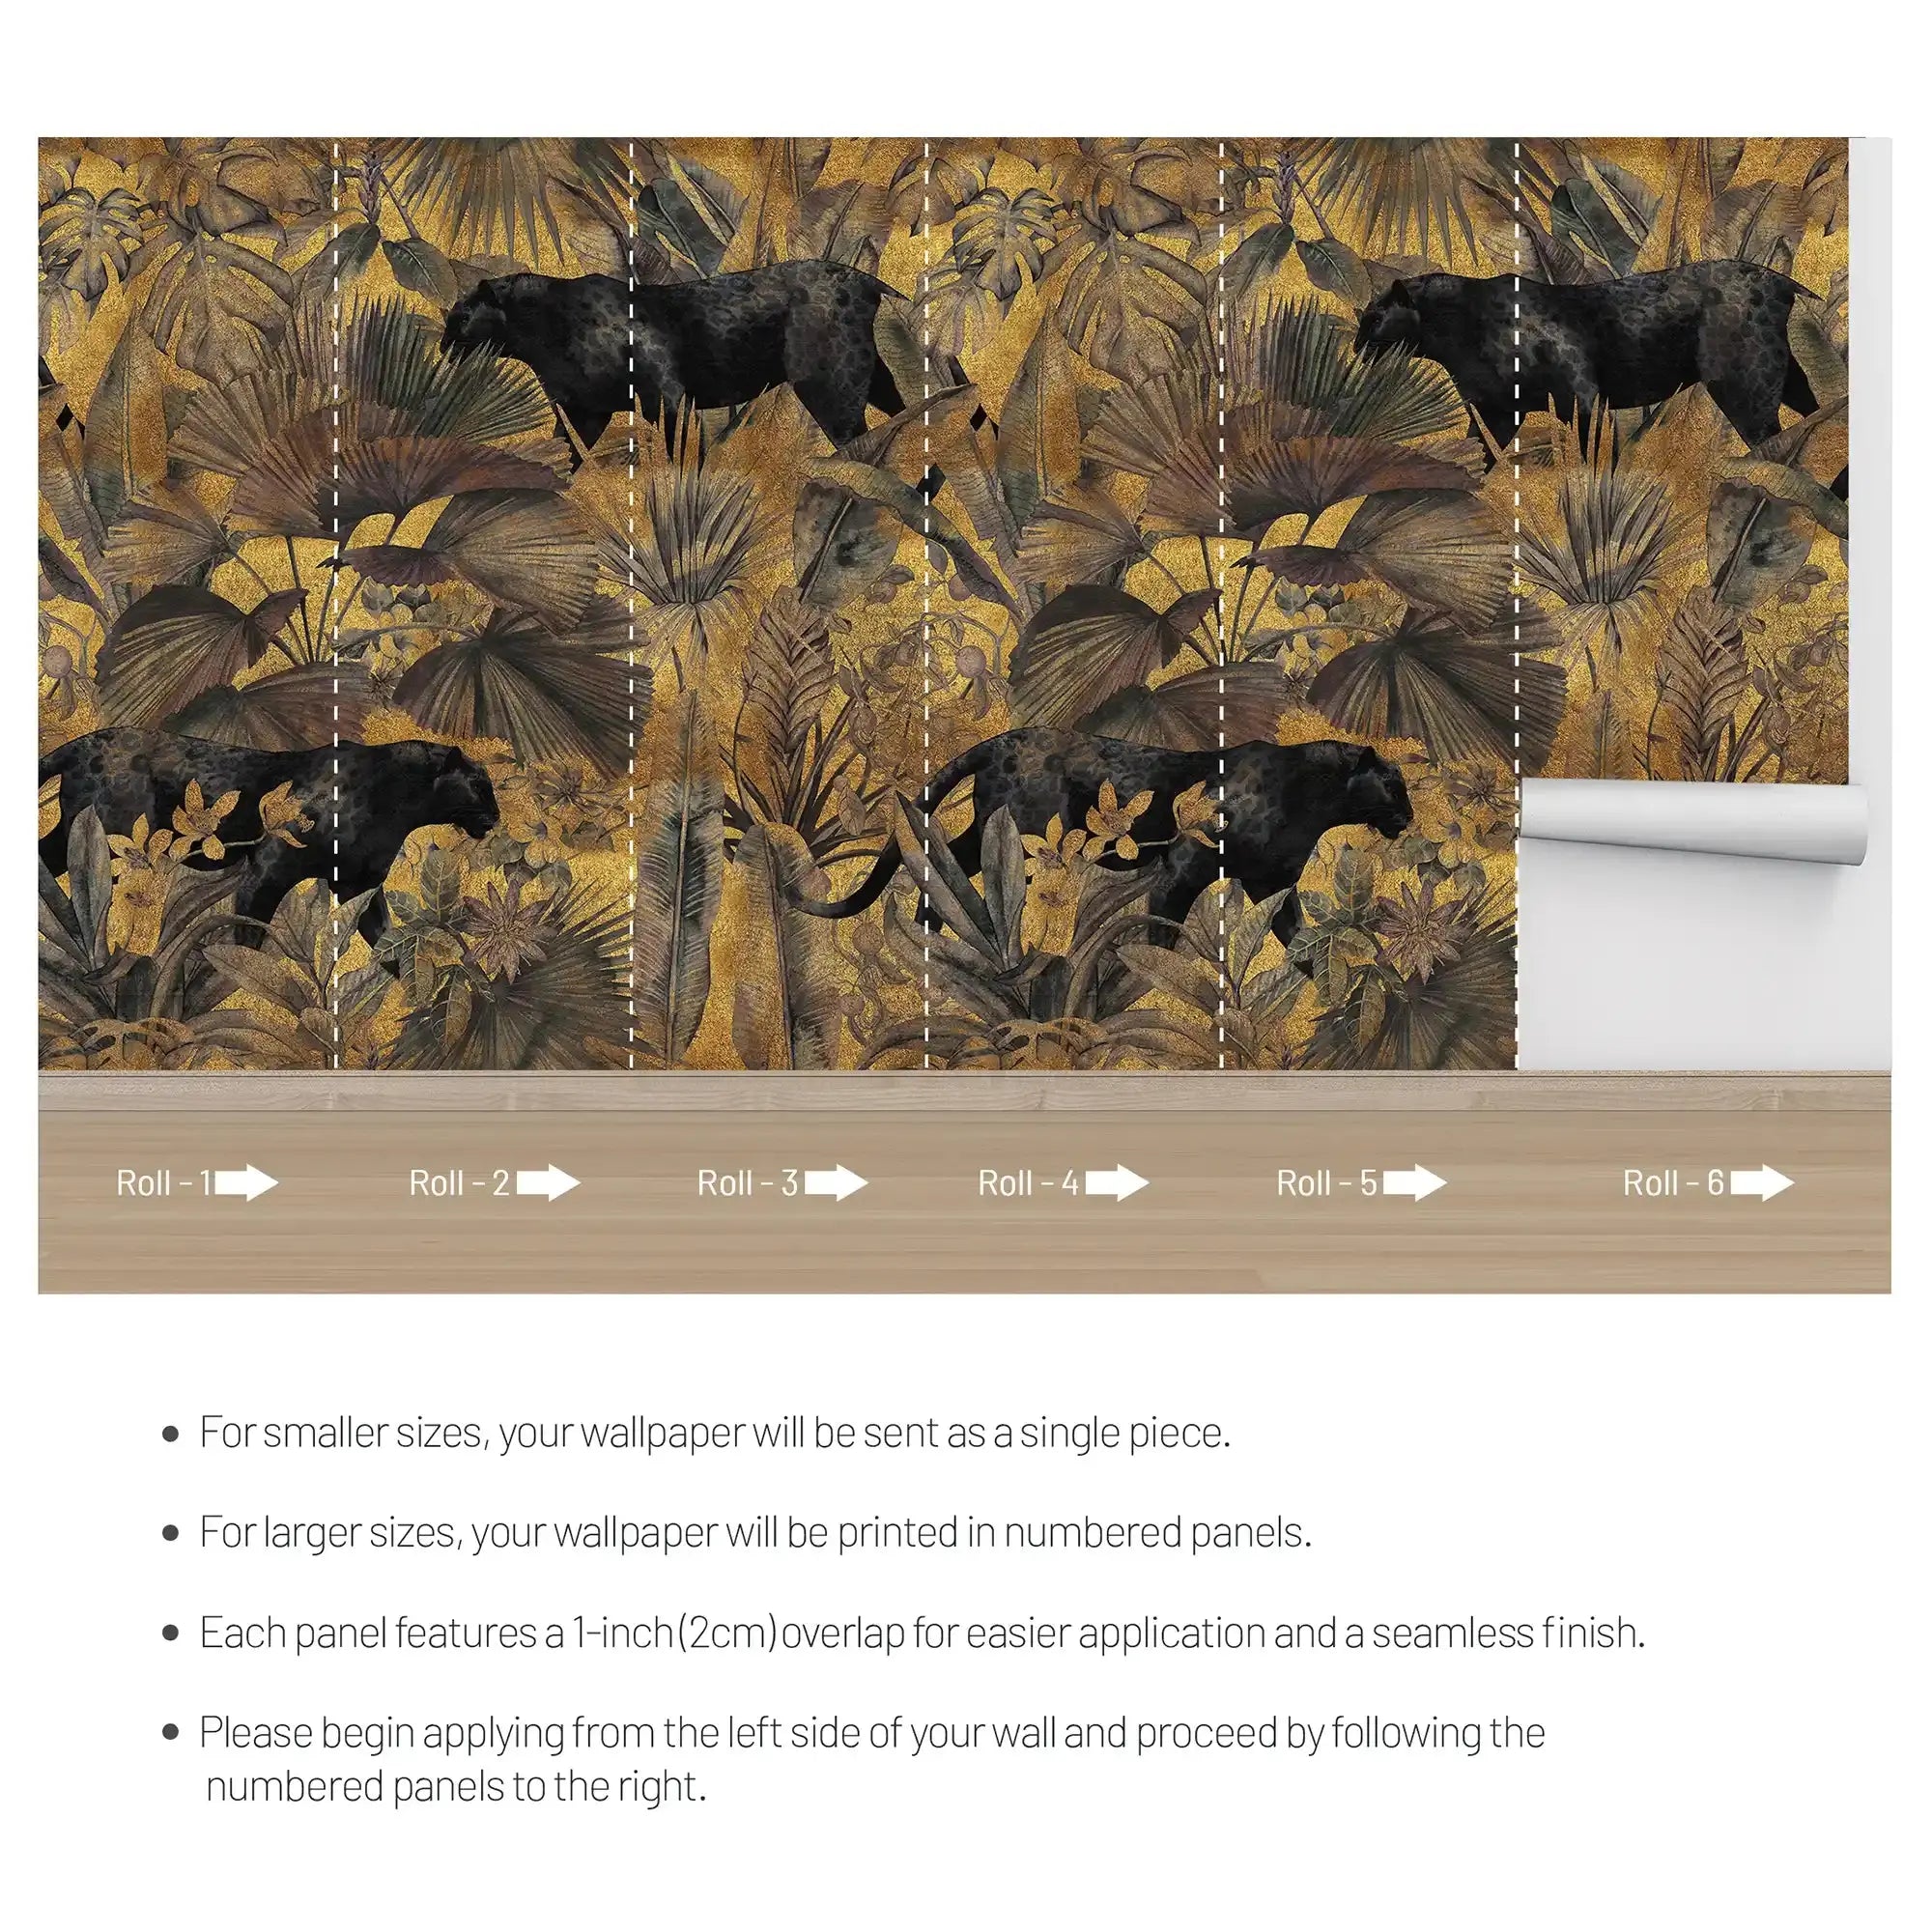 3076-A / Botanical Wallpaper with Panther Theme: Adhesive Mural for Wall Accent - Artevella